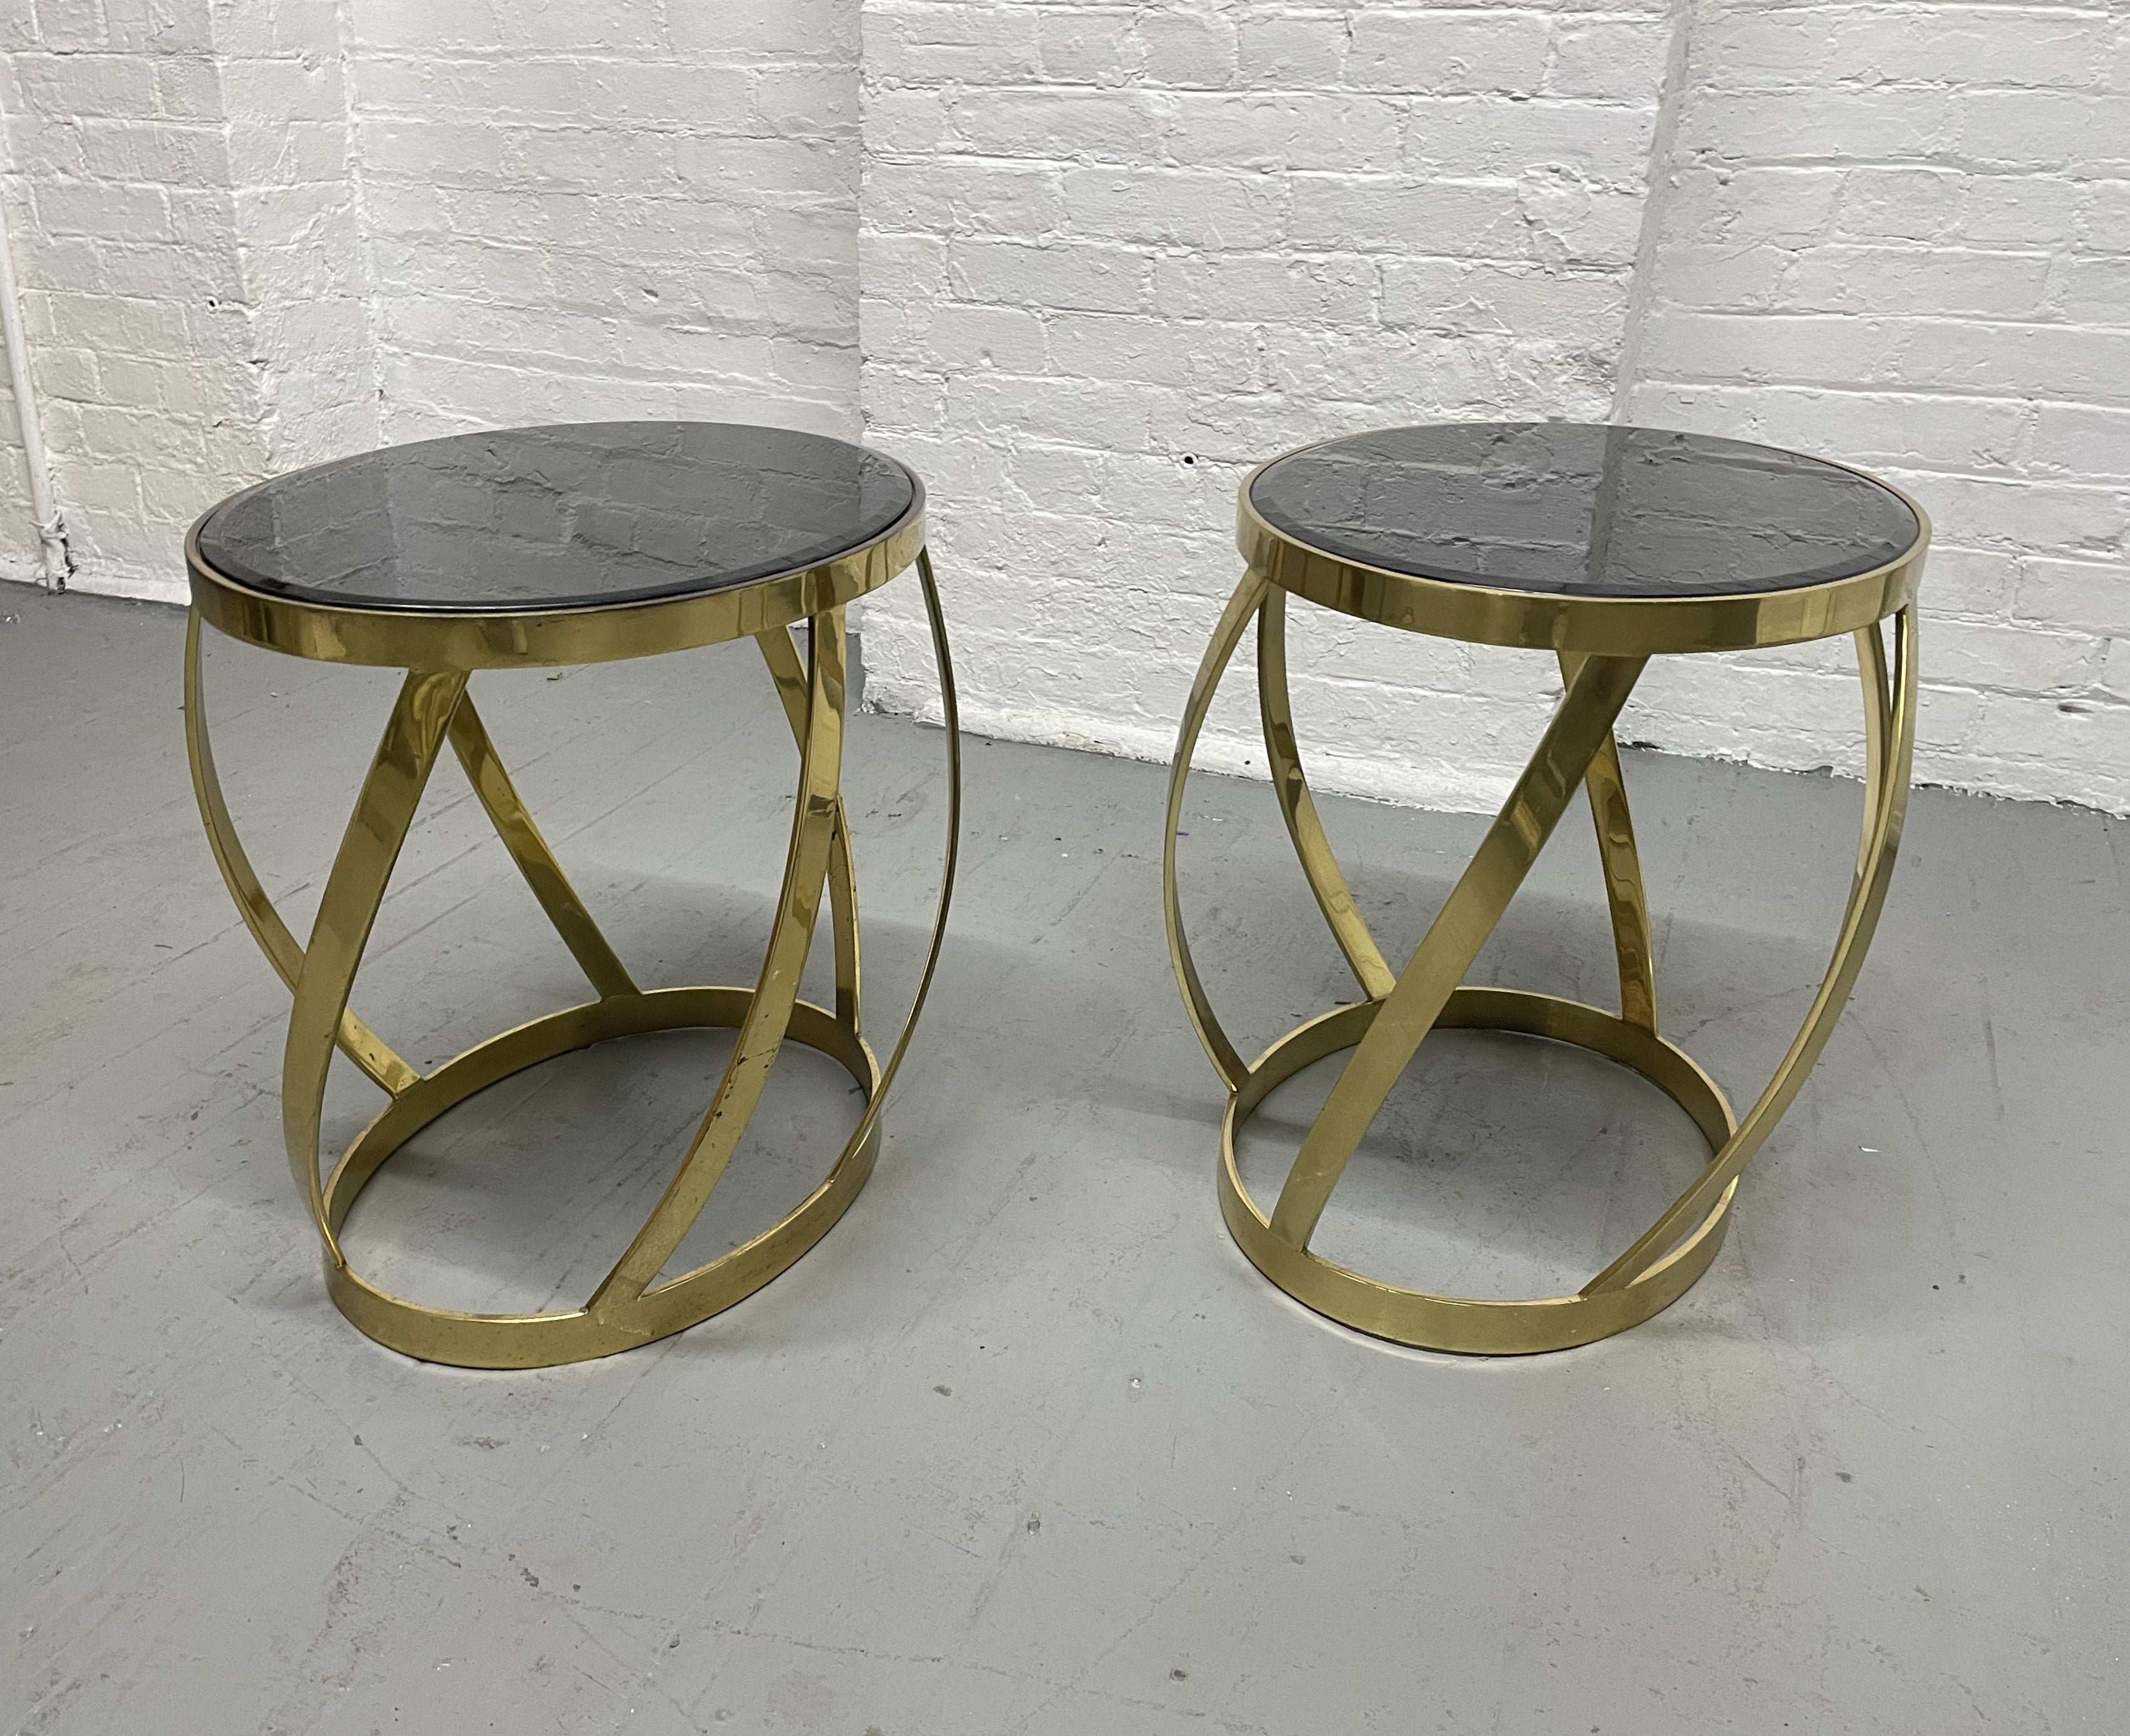 Pair of rare oval onyx brass side tables by Karl Springer. Heavy brass tables with an onyx beveled insert top. One table is slightly taller and wider.
Taller: 17.75H x 17.25W x 15D.
Smaller: 17.5H x 19.5W x 14.75D.